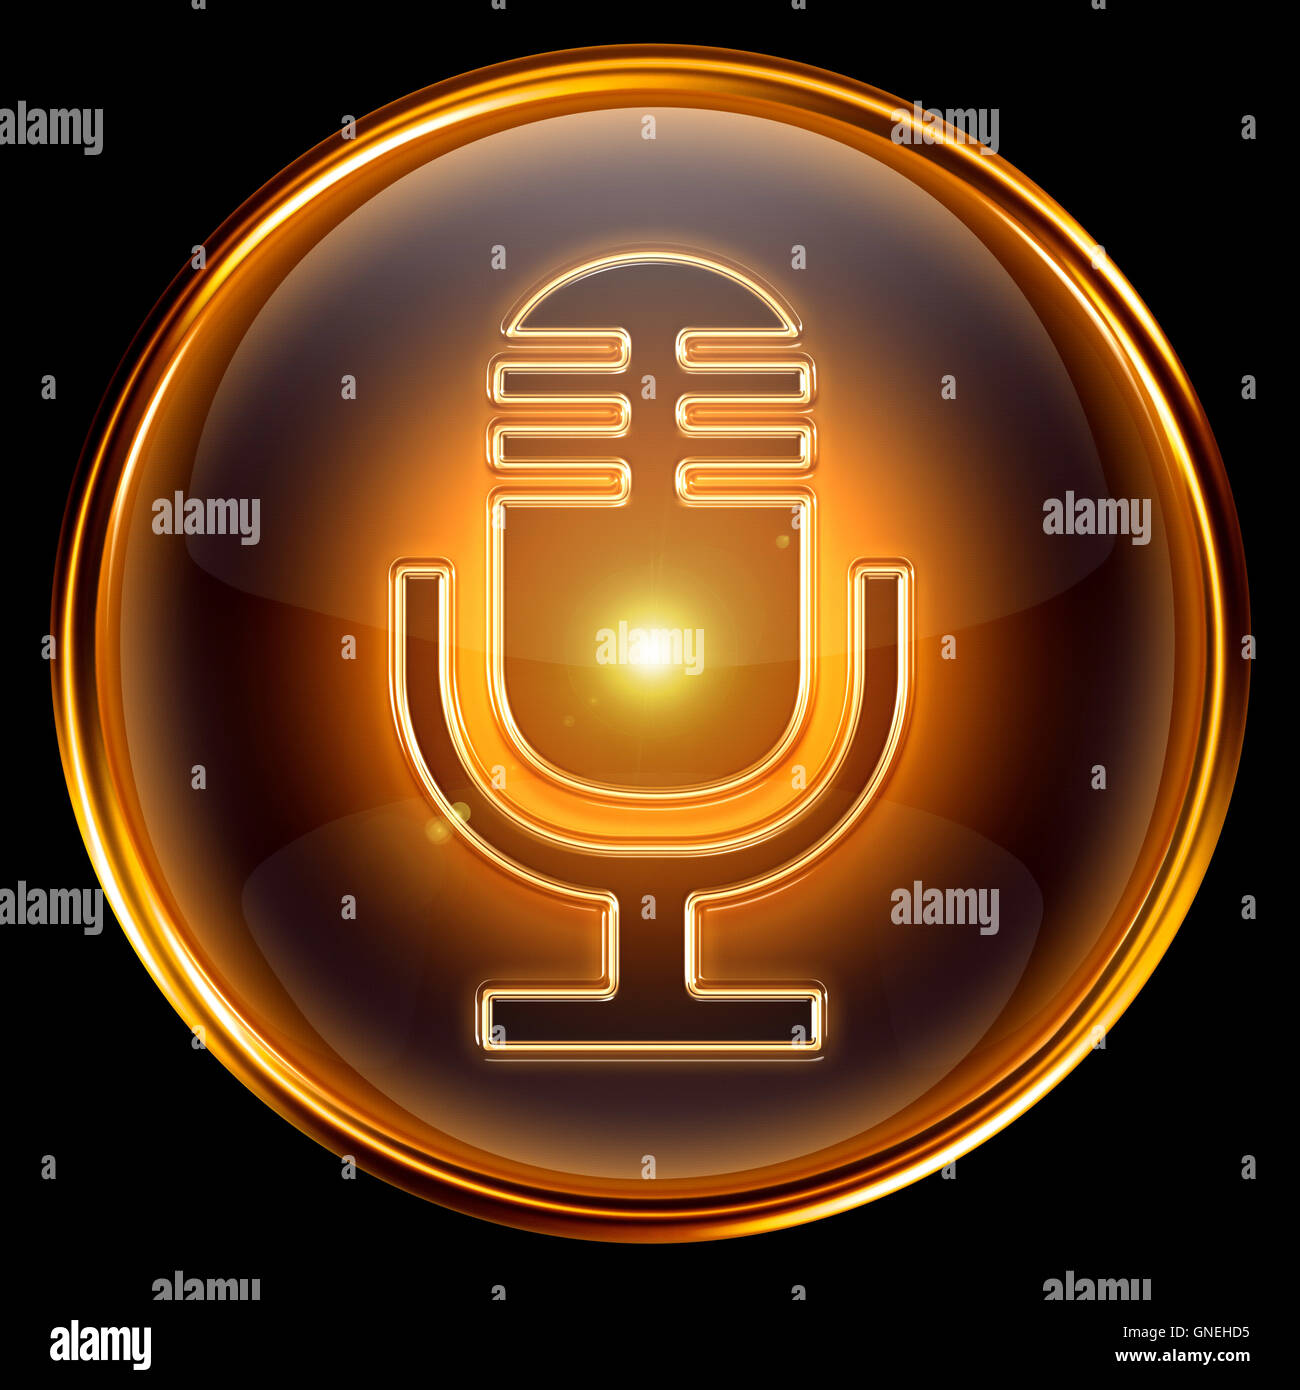 Microphone Icon Golden Isolated On Black Background Stock Photo Alamy